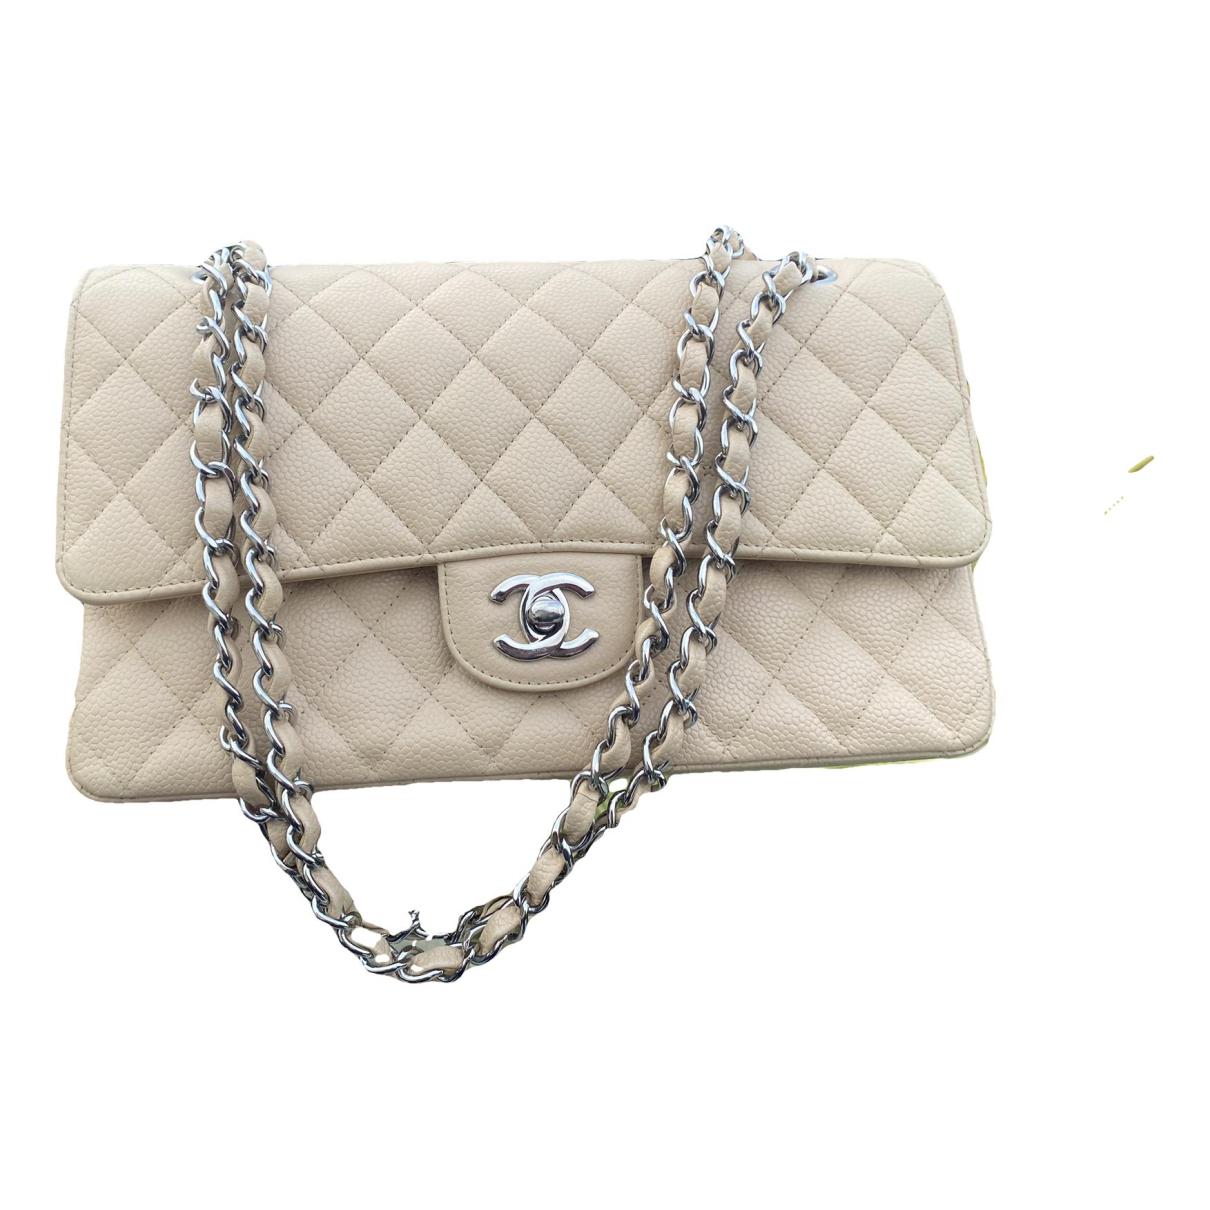 Timeless/classique leather bag Chanel Pink in Leather - 37940354